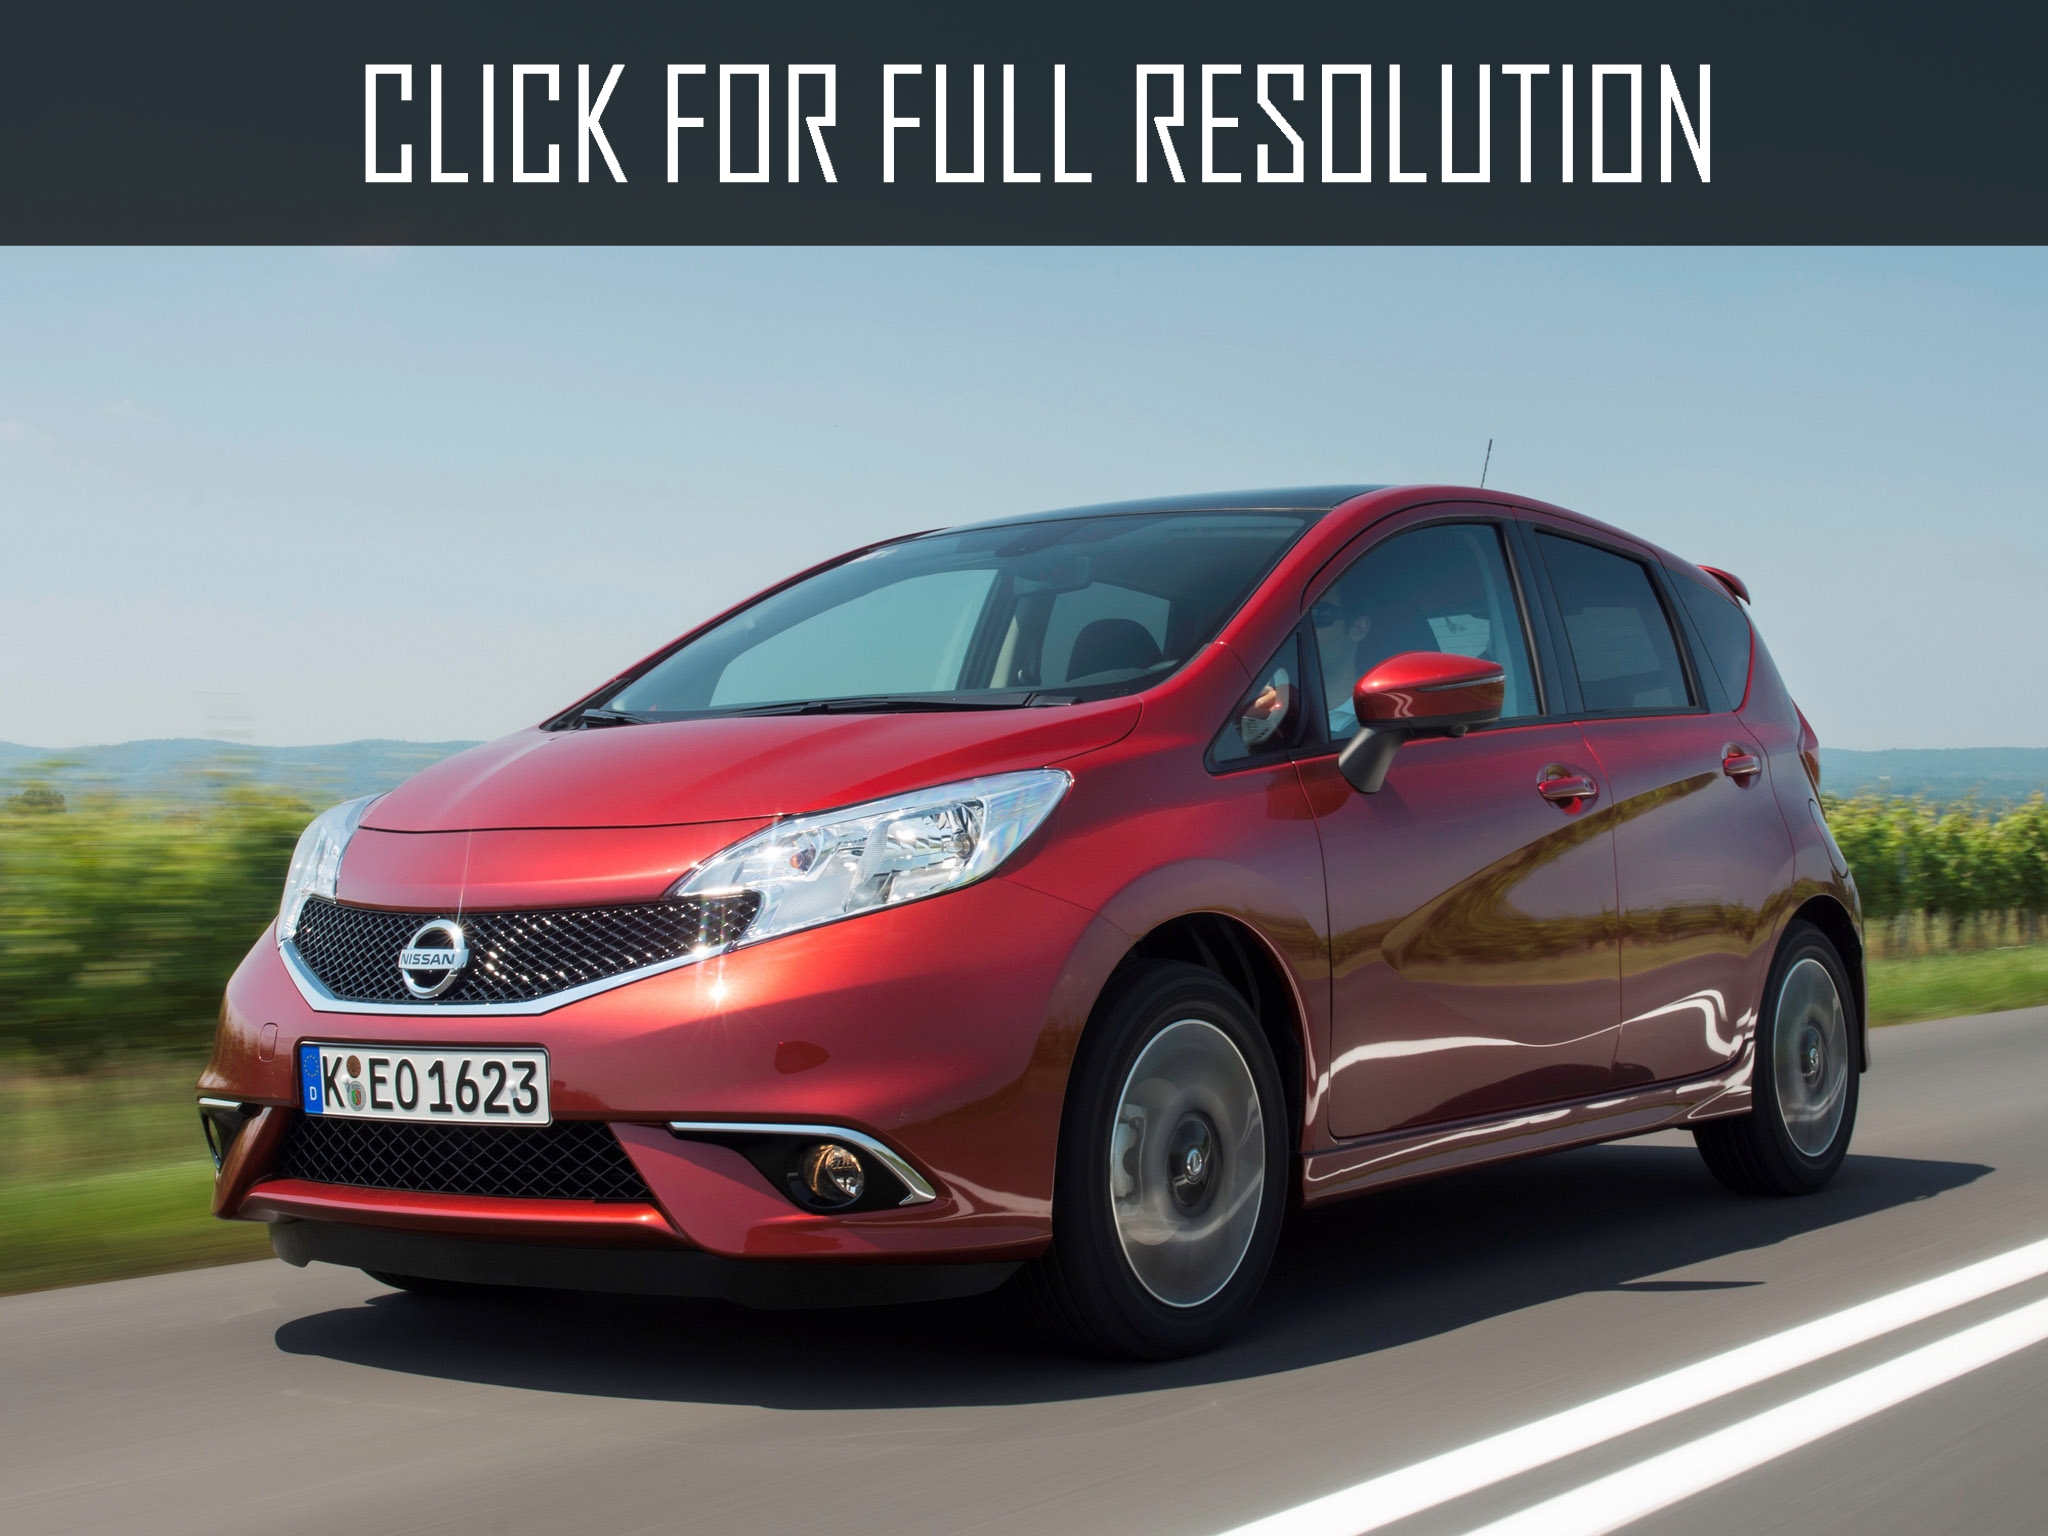 Nissan Note E12 reviews, prices, ratings with various photos